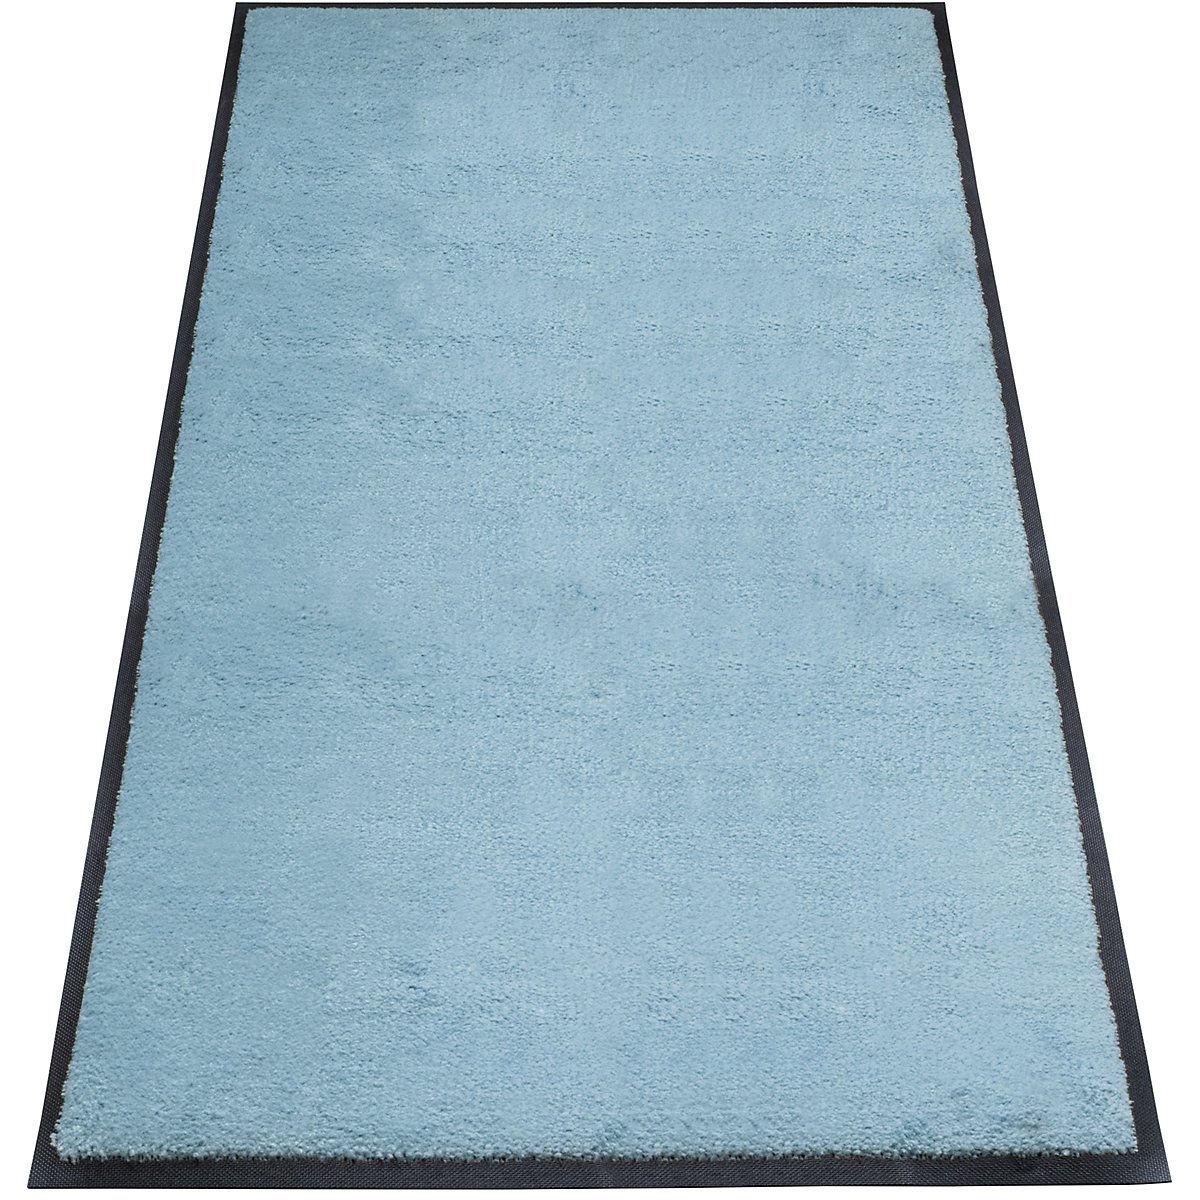 EAZYCARE STYLE entrance matting, LxW 1500 x 850 mm, pearl gentian blue-5